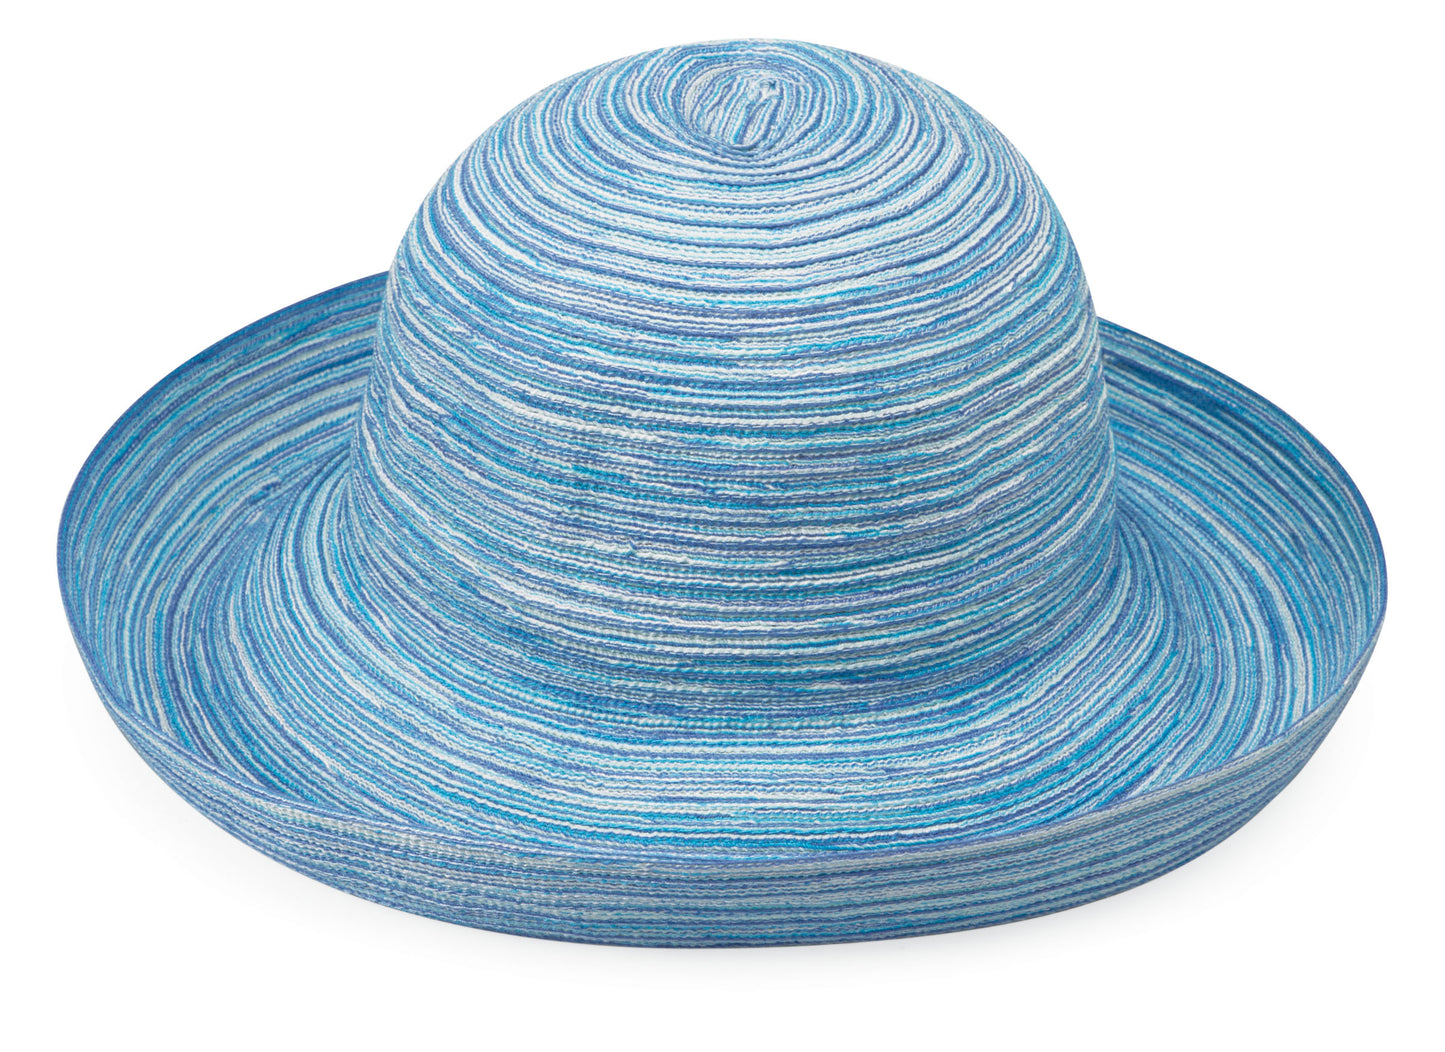 This packable blue beach hat not only offers UPF 50+ sun protection but is also recommended by the Skin Cancer Foundation. Its wide brim ensures stylish sun coverage, making it a travel-friendly and fashionable addition to your personal fashion collection.